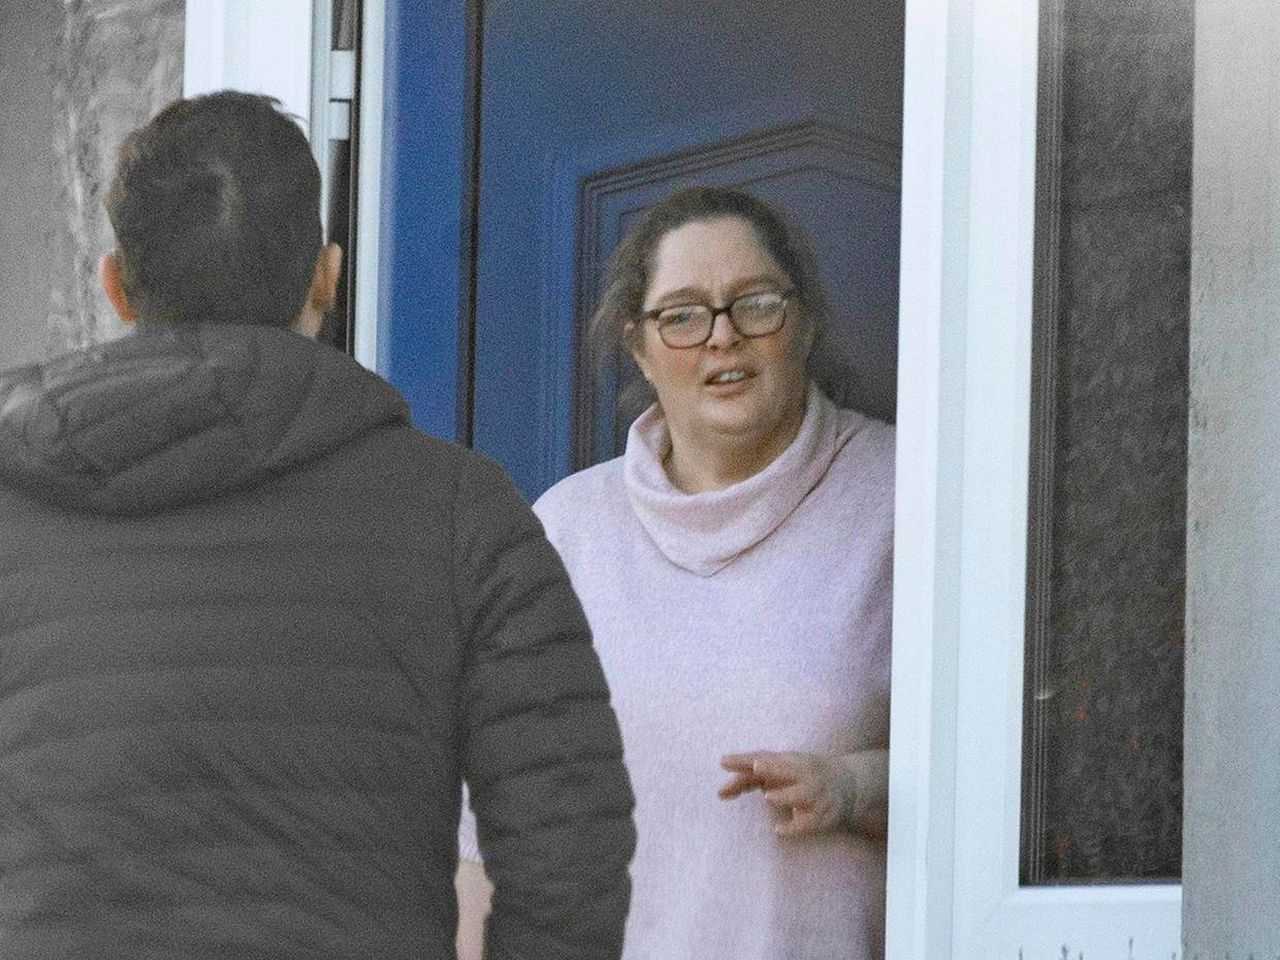 Mum Who Stole Thousands From Playgroup After Volunteering To Be Treasurer Avoids Jail